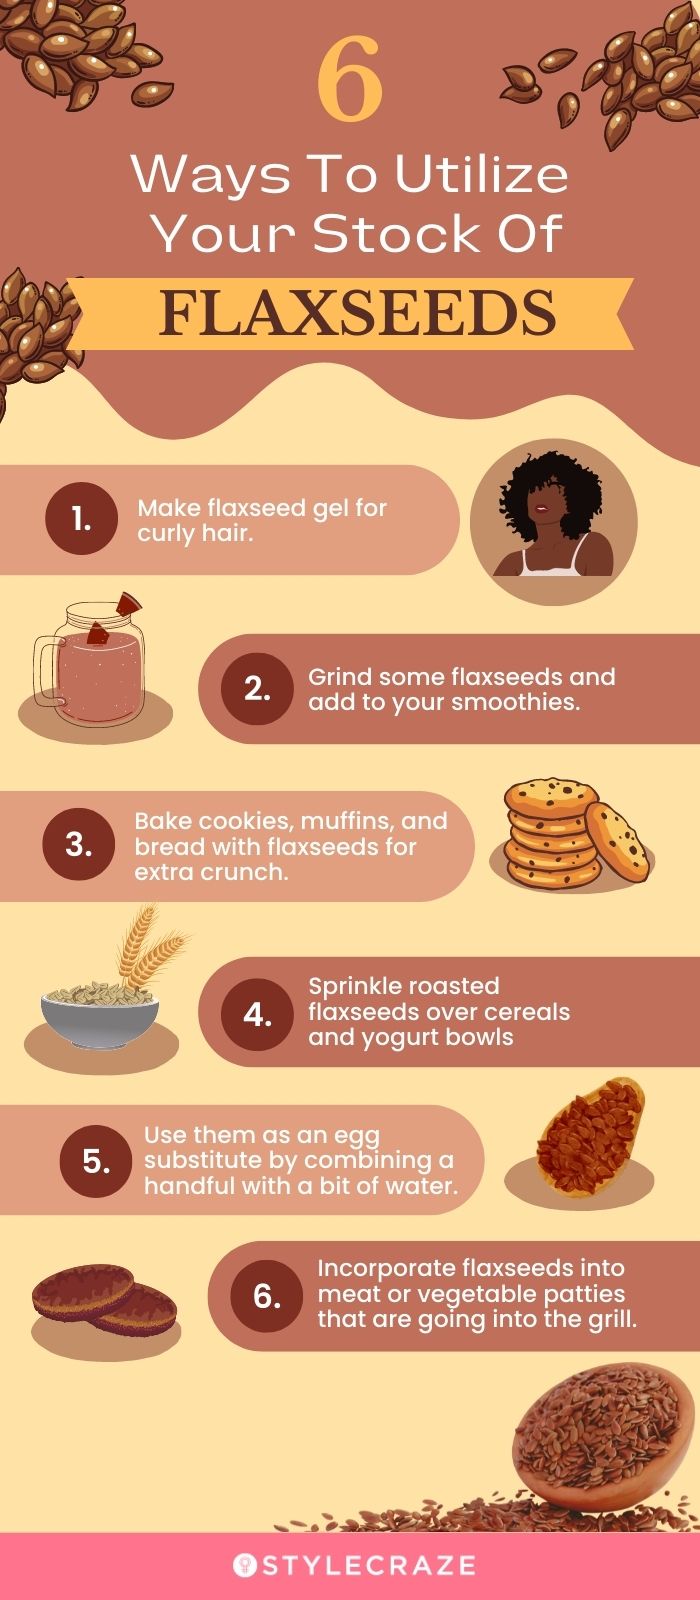 6 ways to utilize your stock of flaxseeds (infographic)